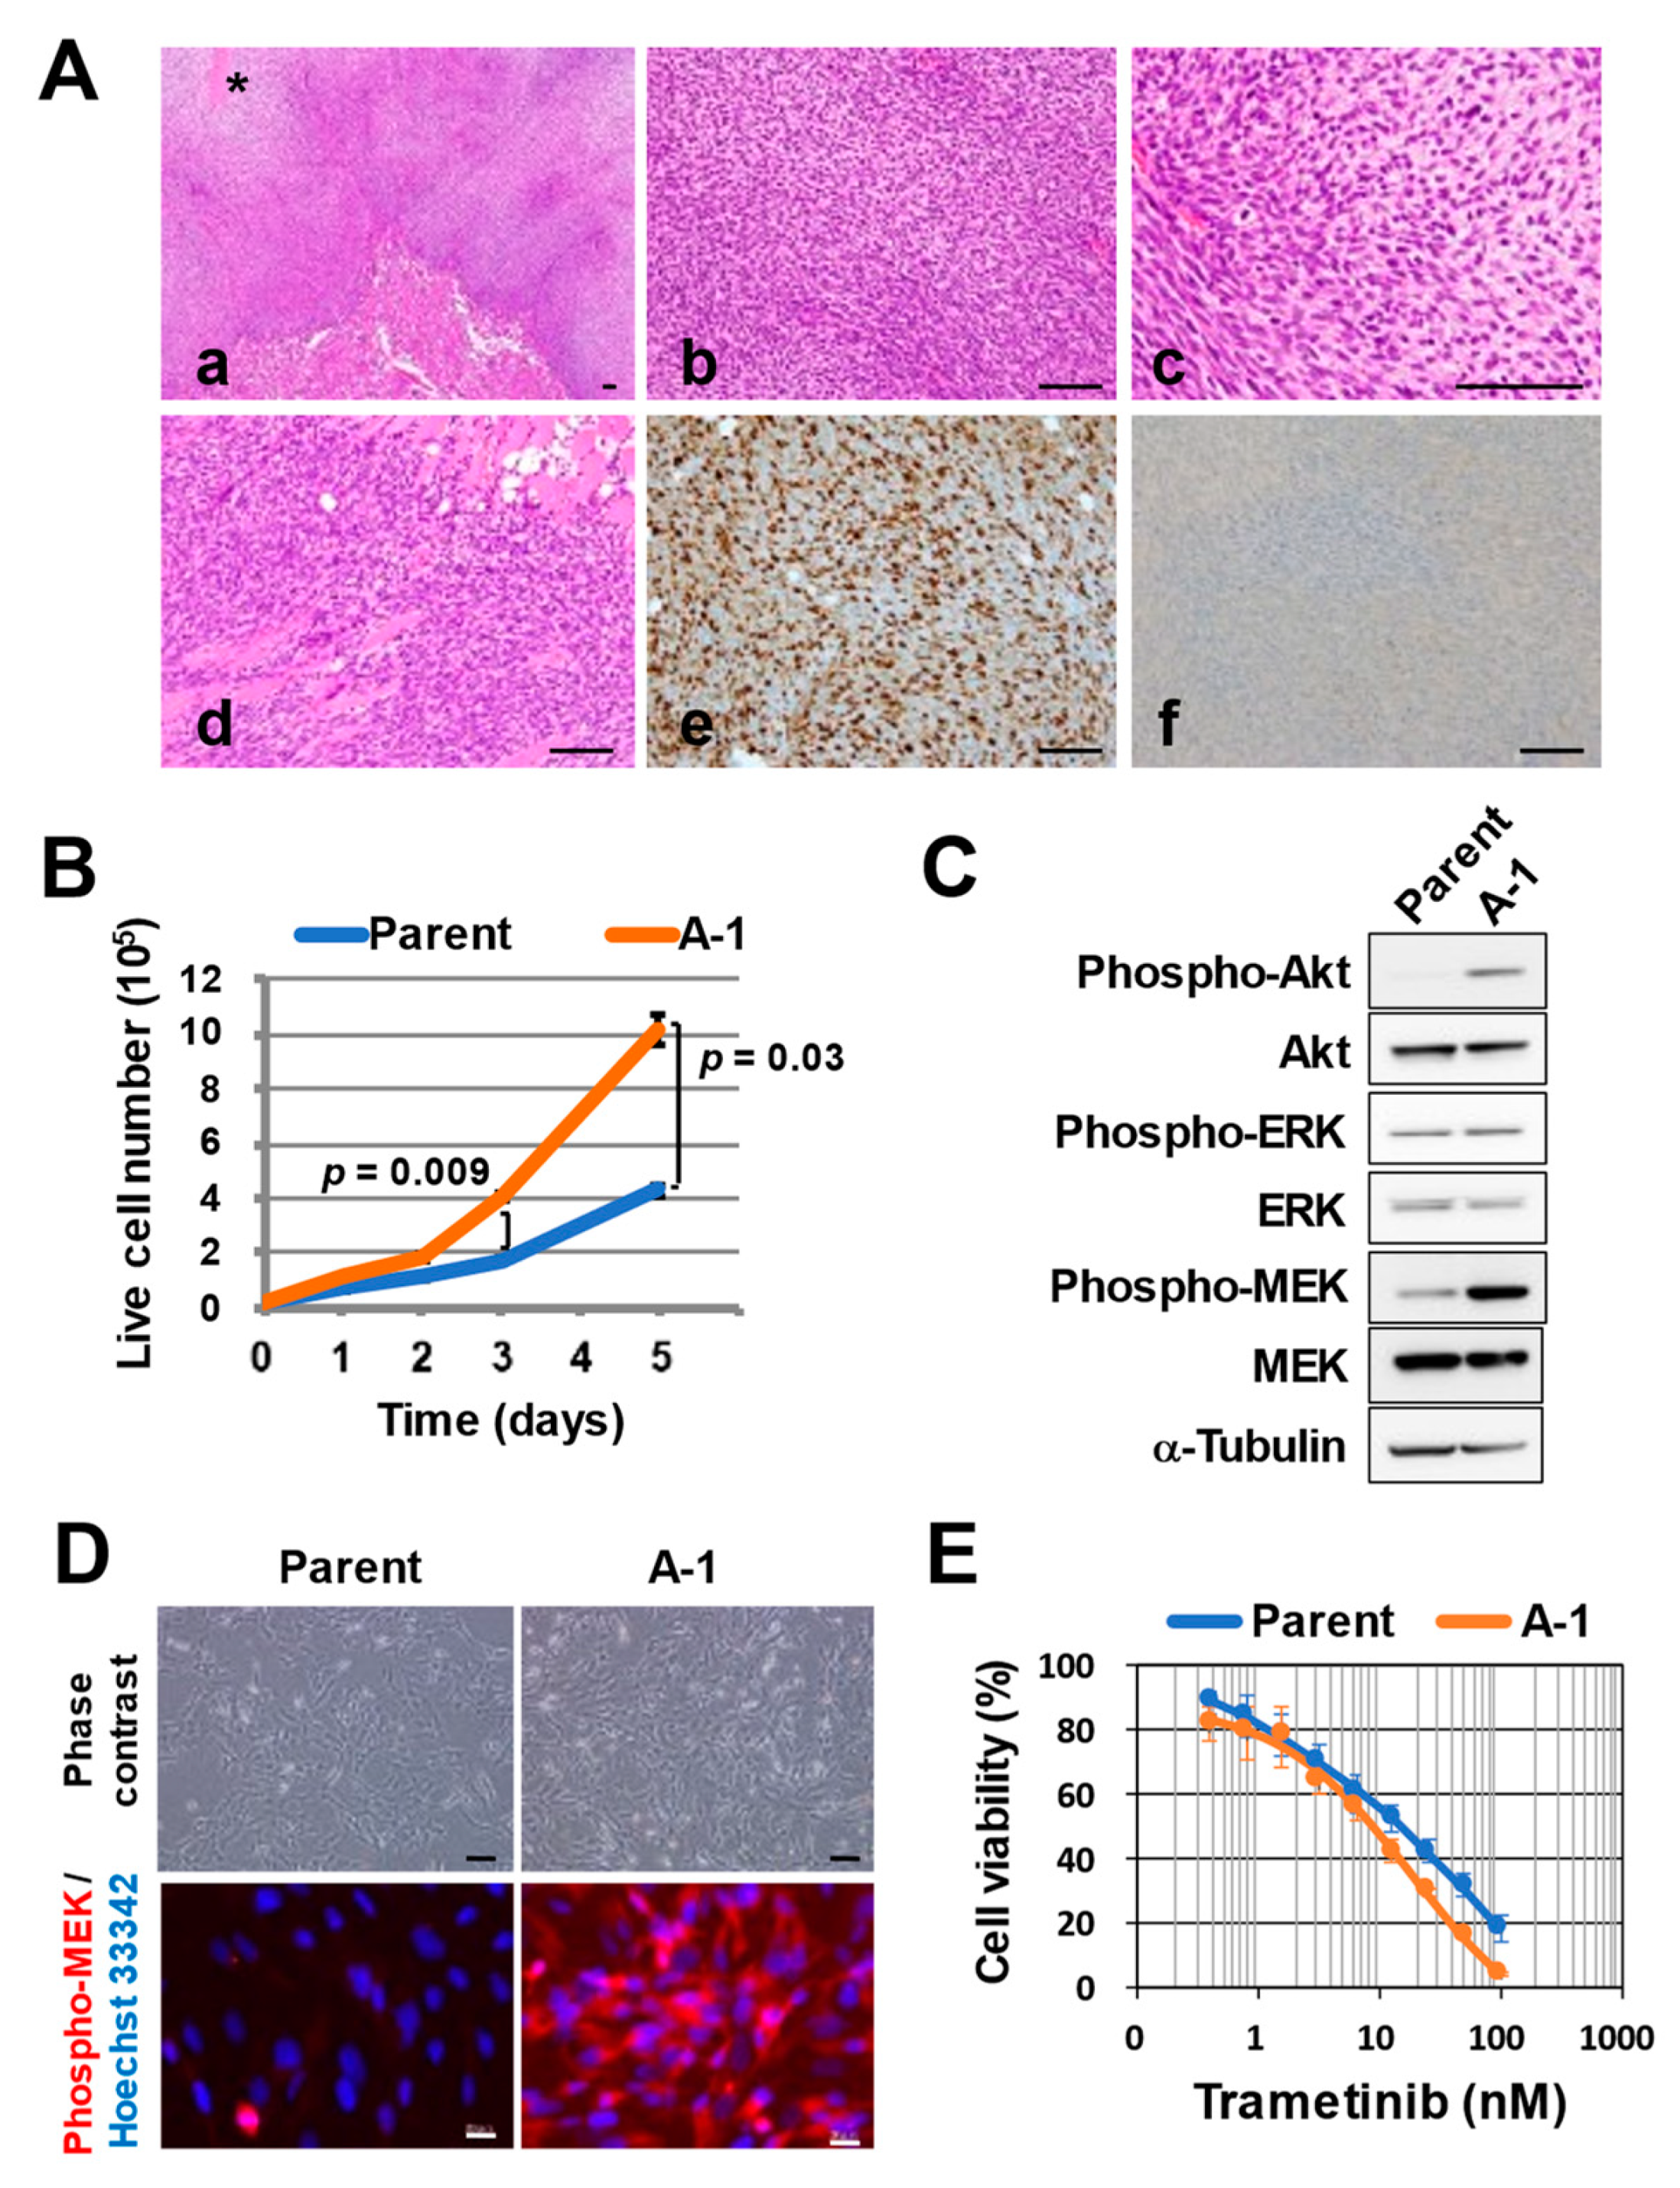 Cancers | Free Full-Text | Mutation of PTPN11 (Encoding SHP-2) Promotes MEK  Activation and Malignant Progression in Neurofibromin-Deficient Cells in a  Manner Sensitive to BRAP Mutation | HTML